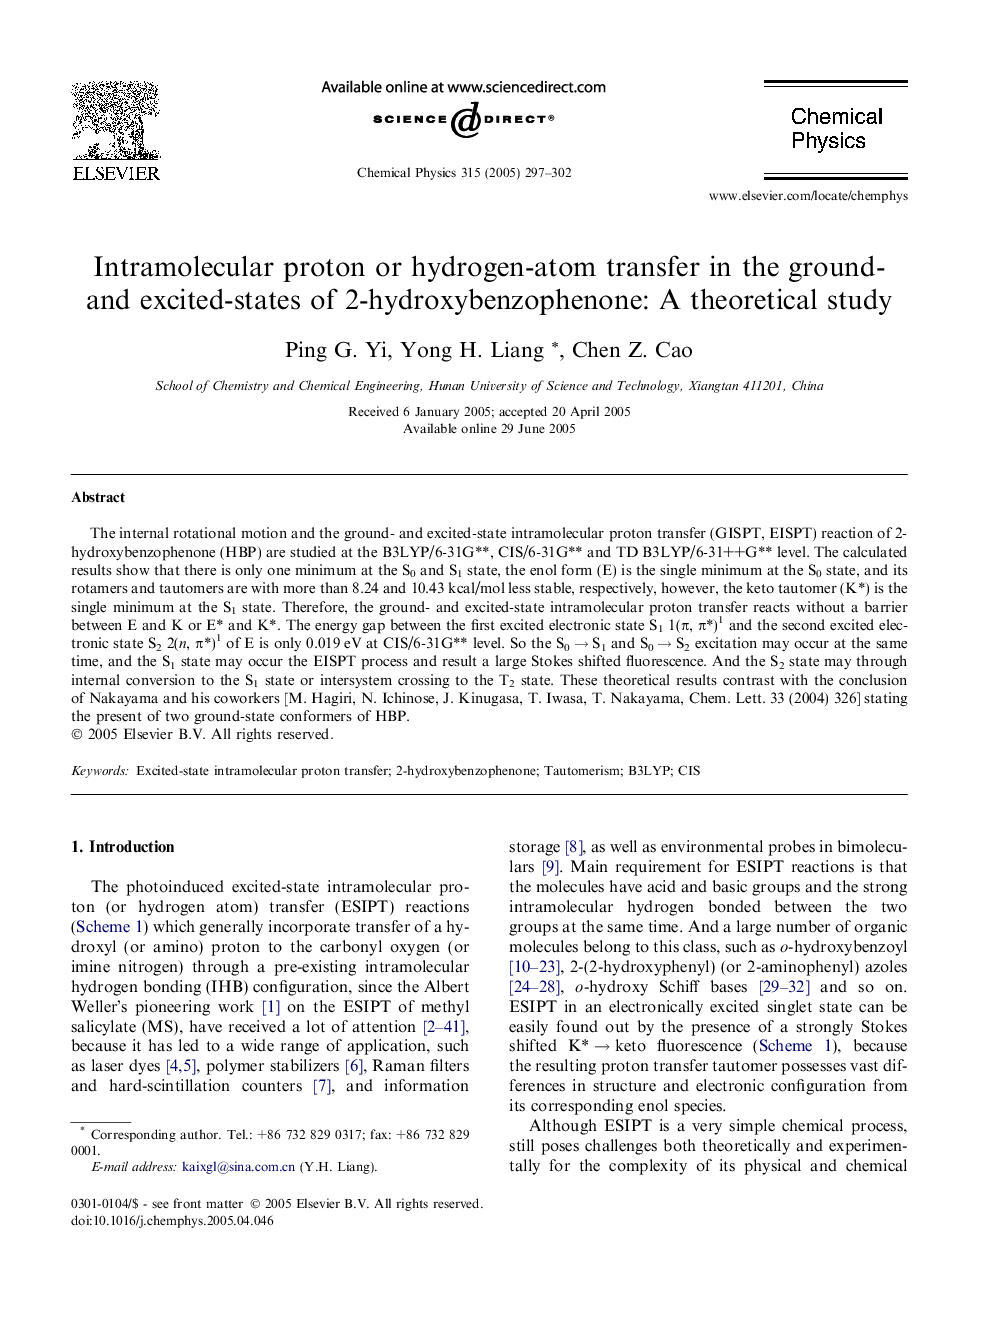 Intramolecular proton or hydrogen-atom transfer in the ground- and excited-states of 2-hydroxybenzophenone: A theoretical study